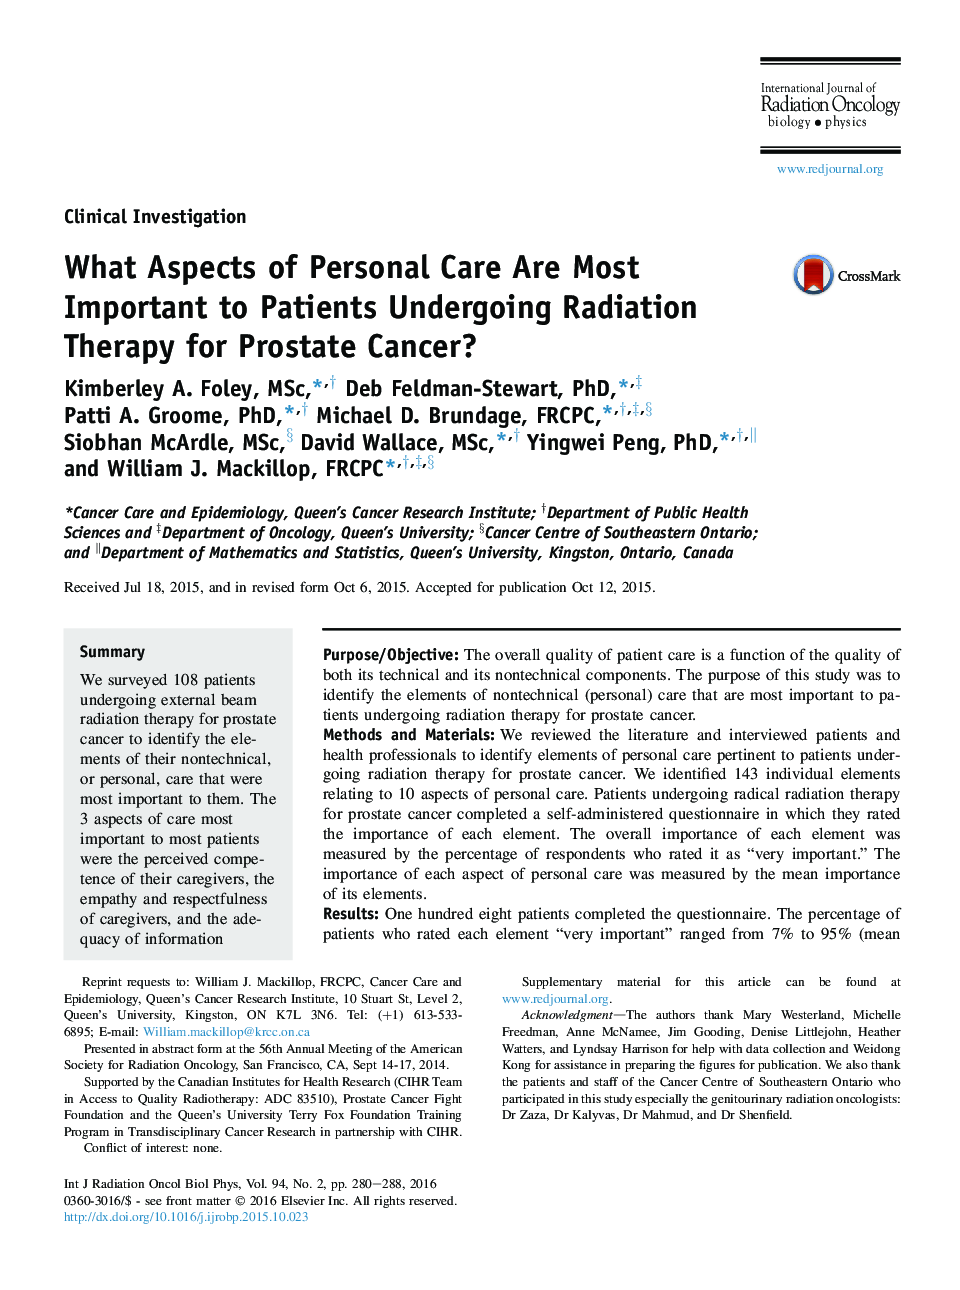 What Aspects of Personal Care Are Most Important to Patients Undergoing Radiation Therapy for Prostate Cancer?